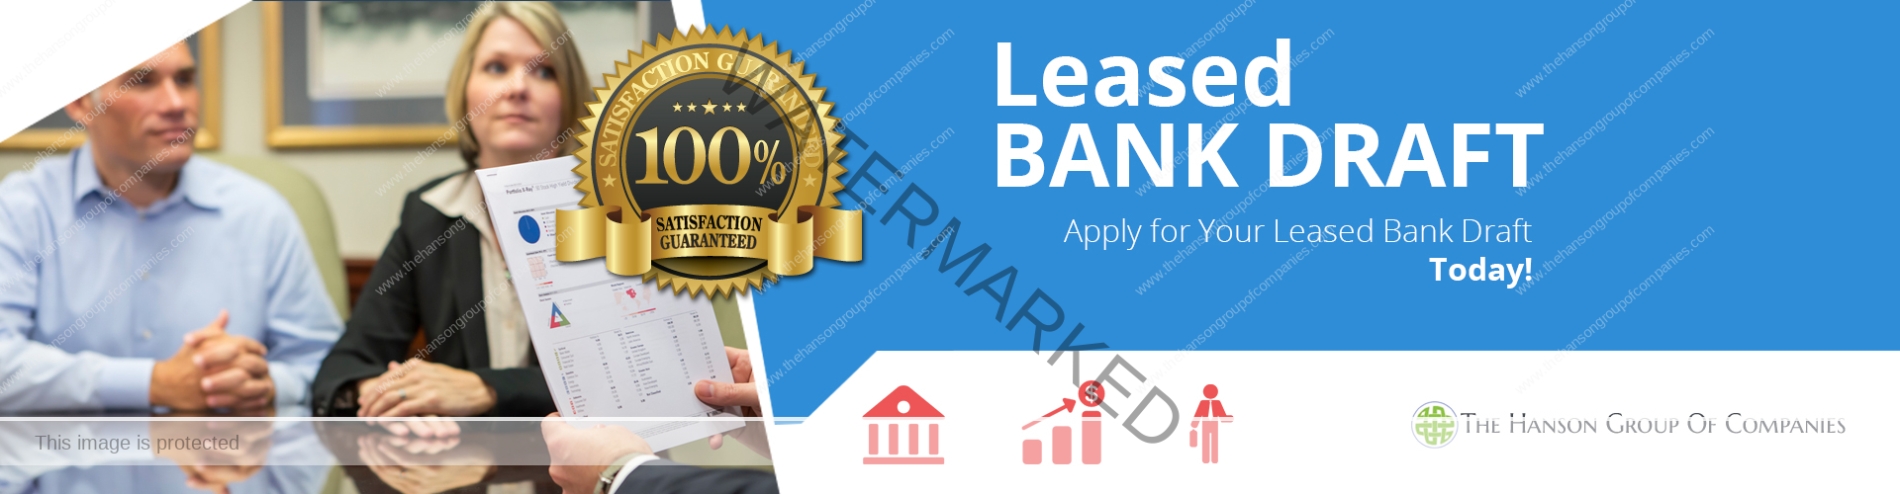 leased-bank-draft